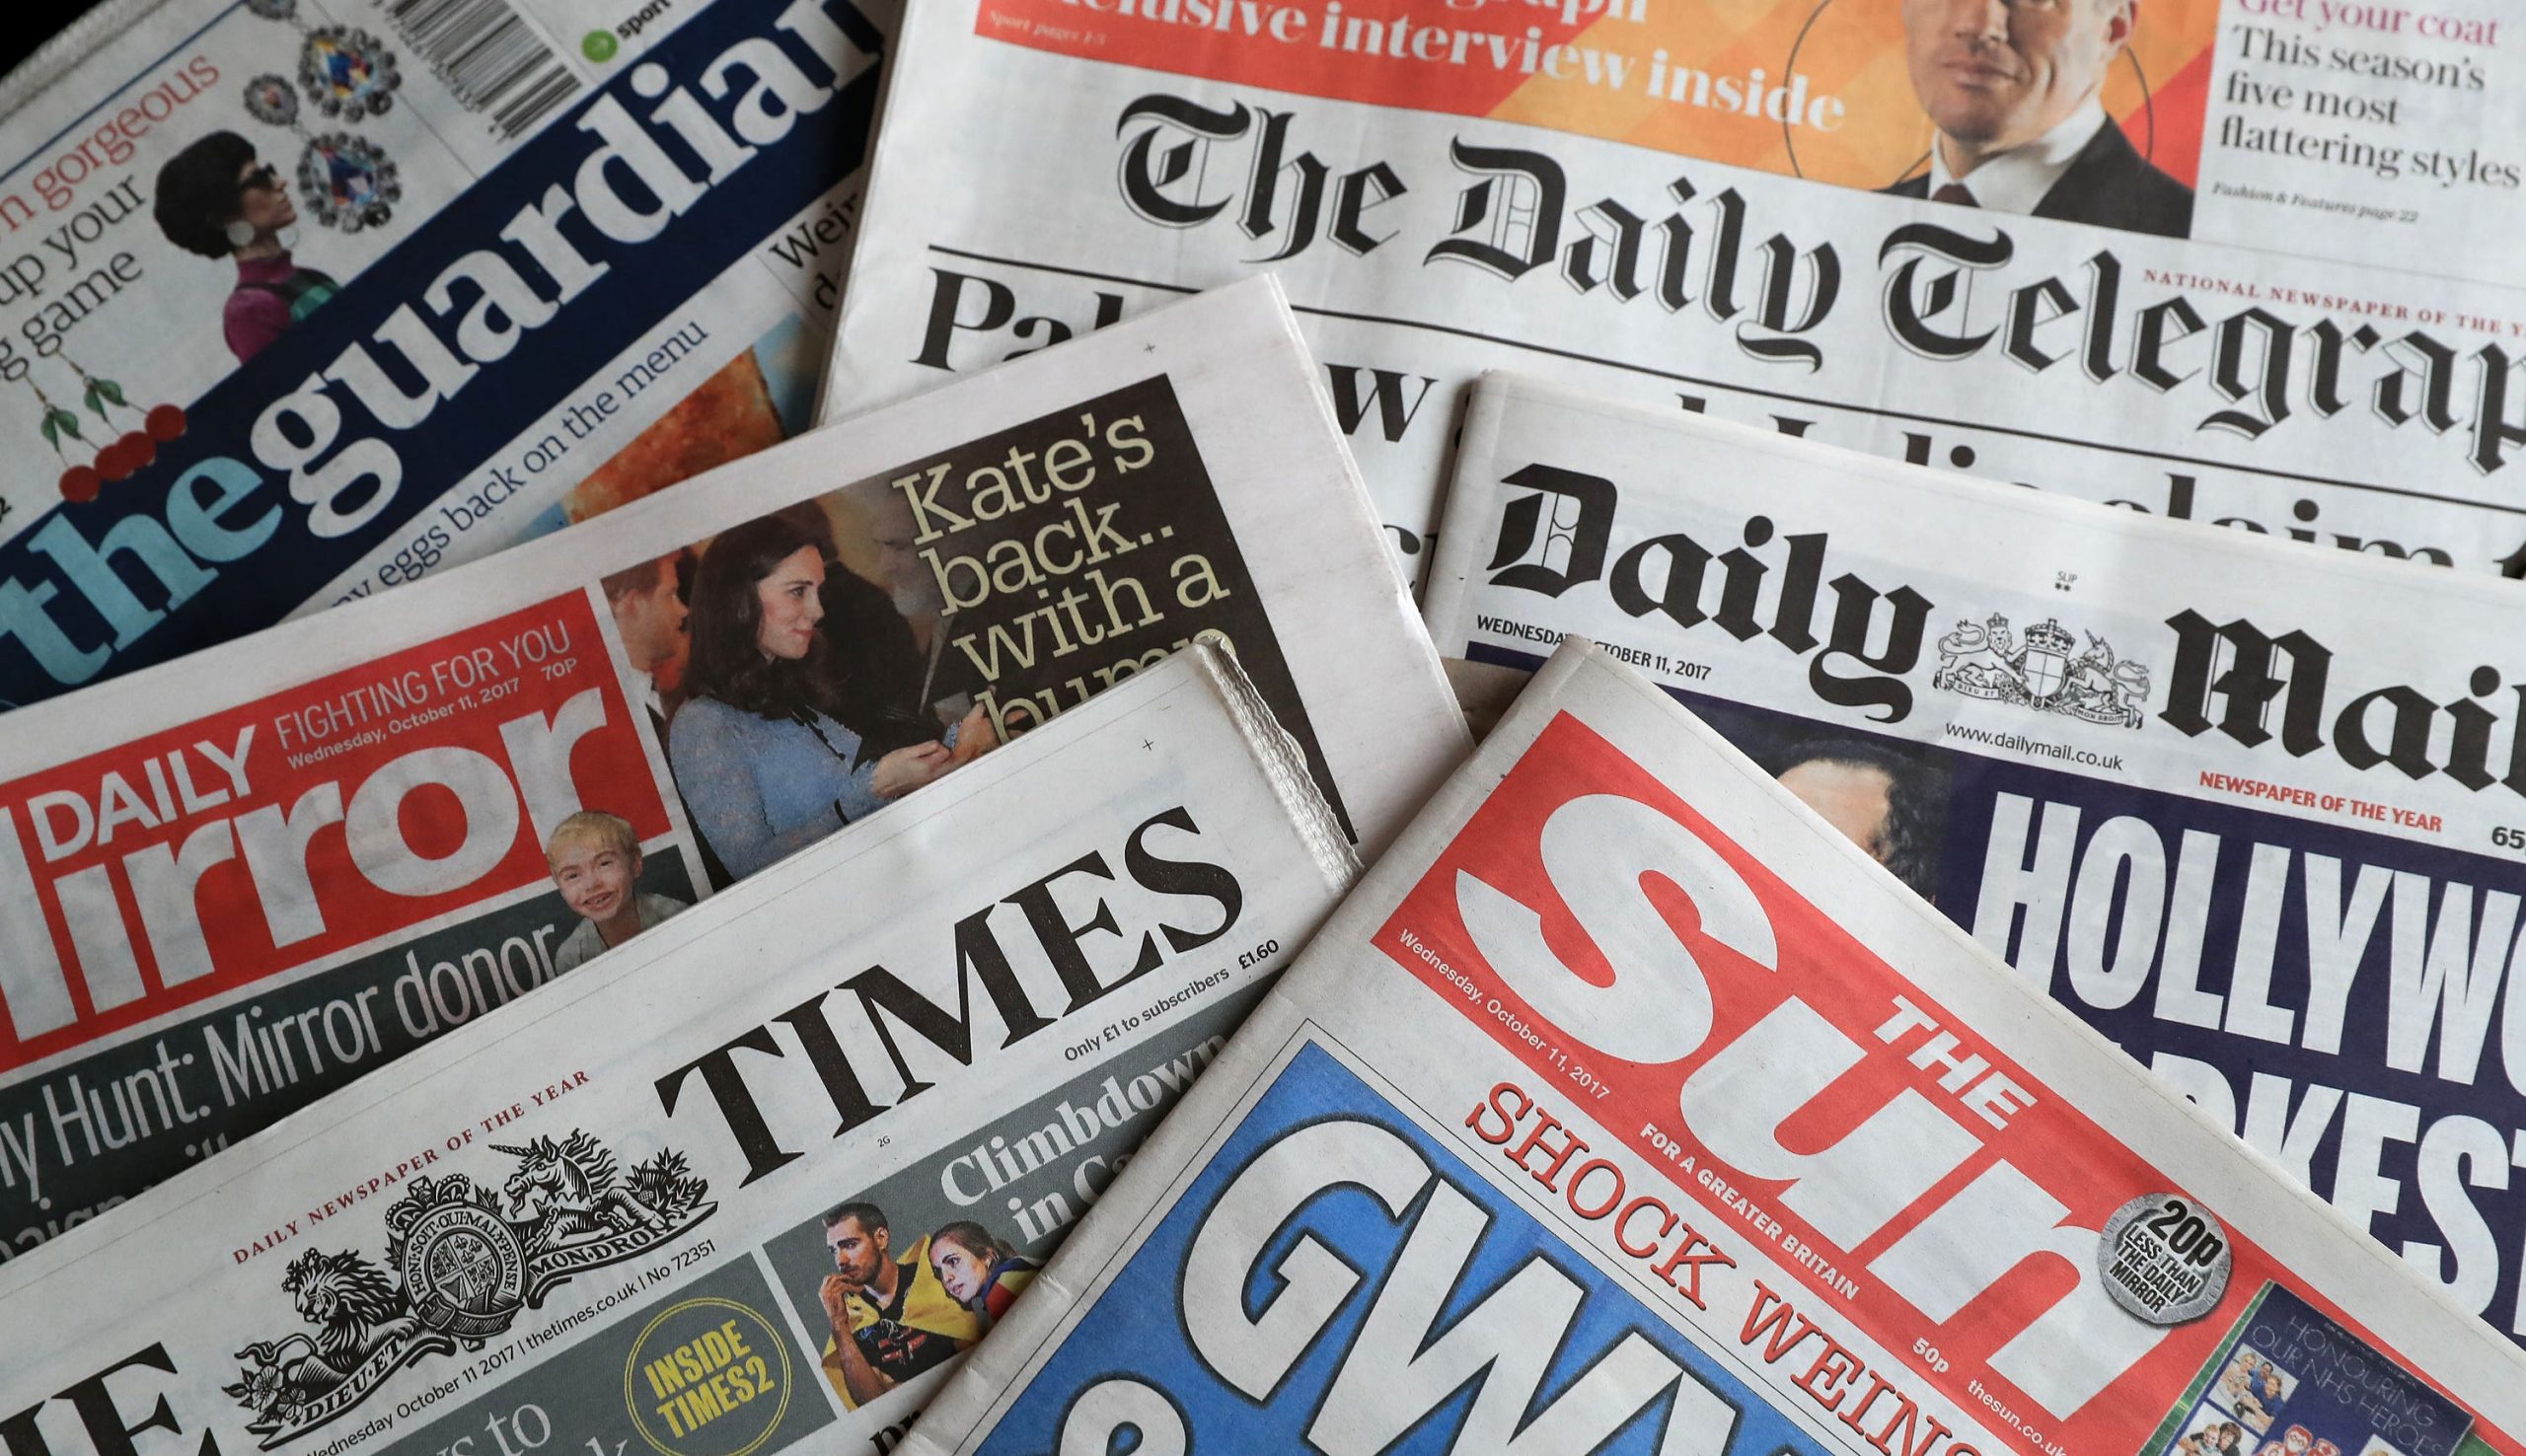 Concerns raised over press freedom in the UK